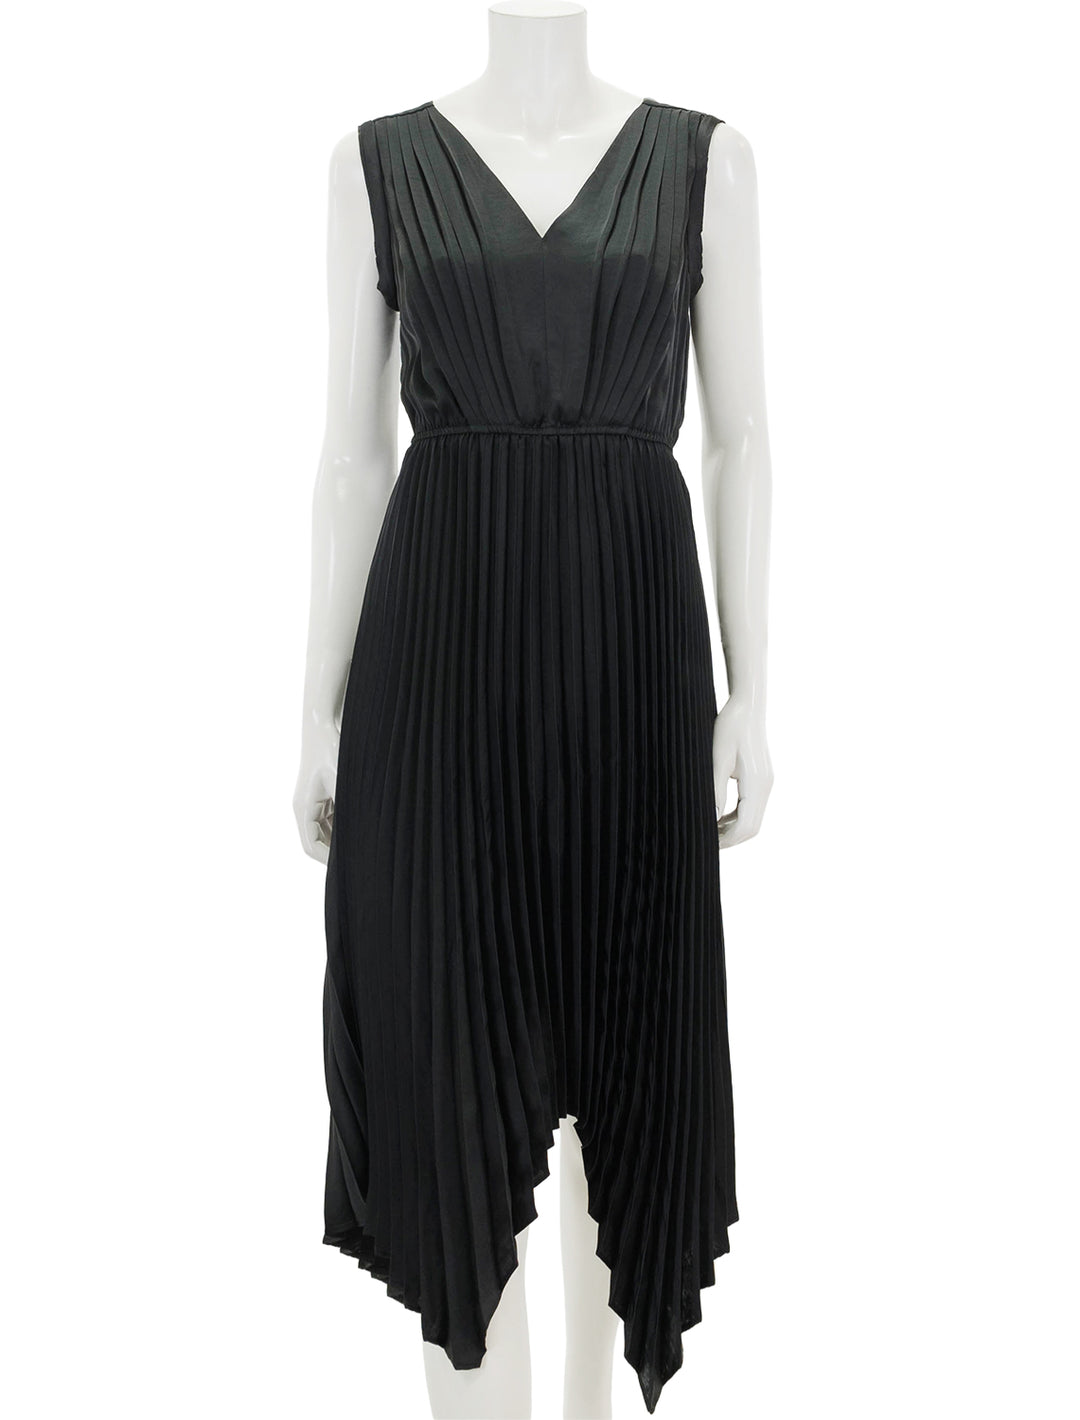 Front view of Steve Madden's donna dress in black.